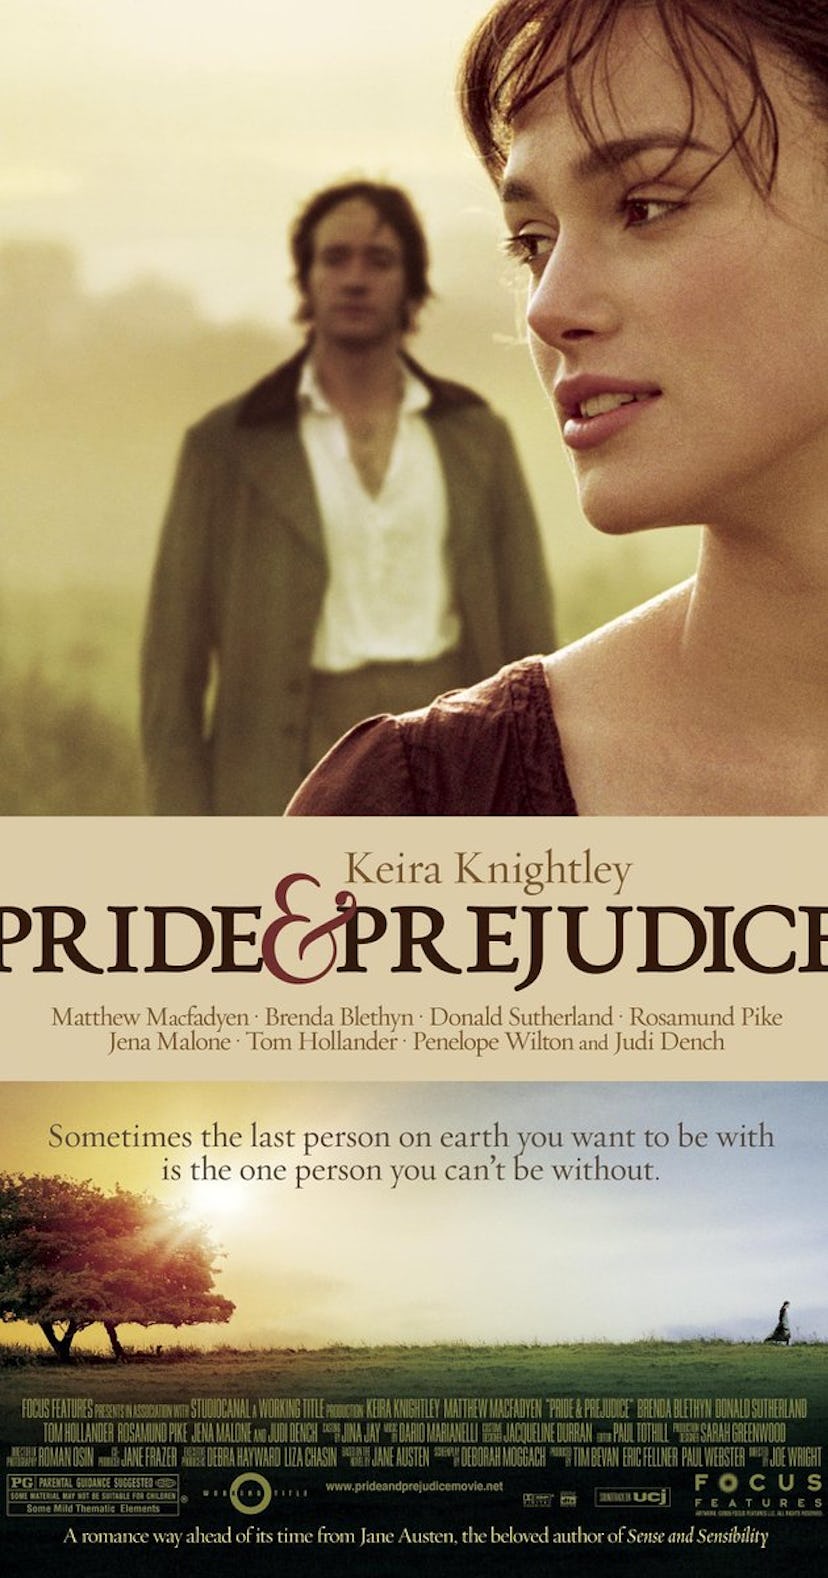 Keira Knightley as the main actress in the Pride & Prejudice romance movie